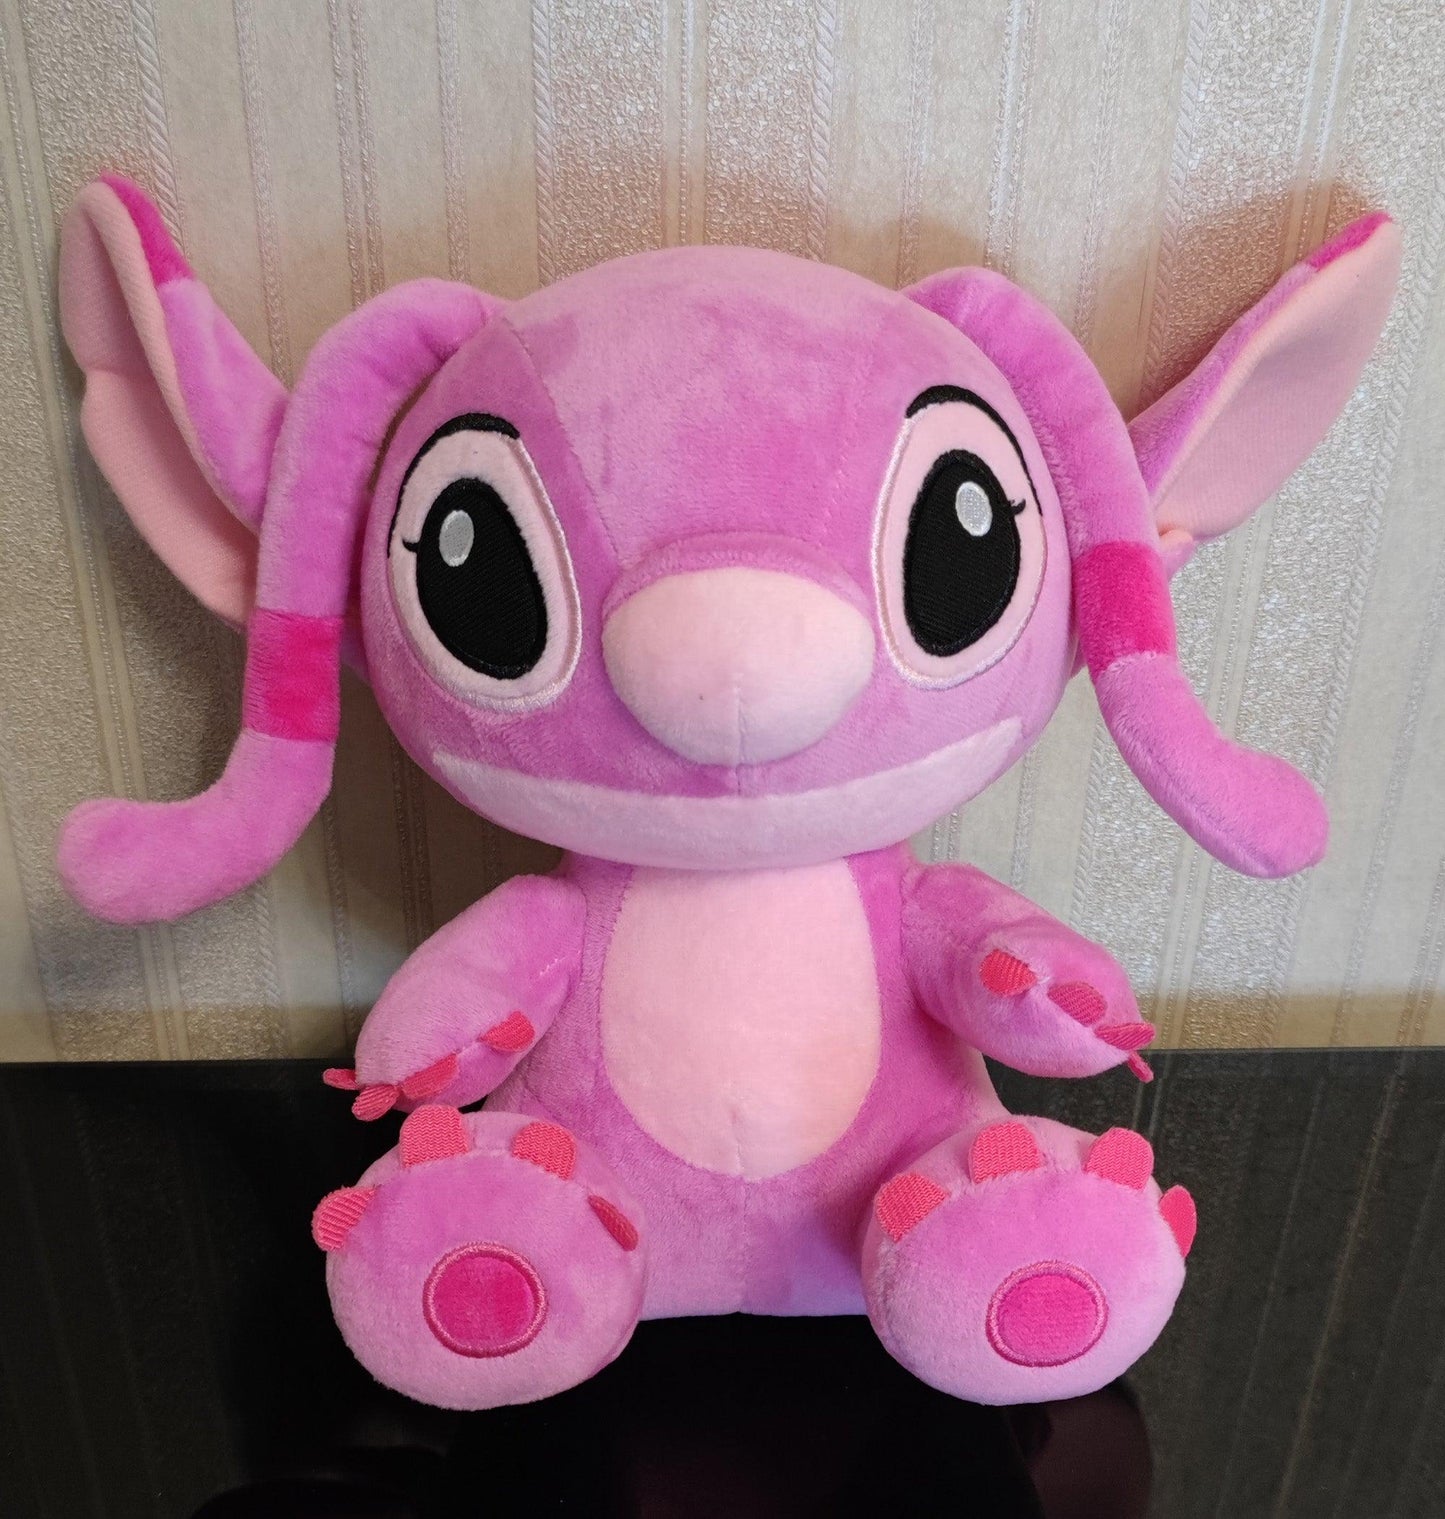 Adorable Lilo and Stitch Doll: A Plush Toy Delight